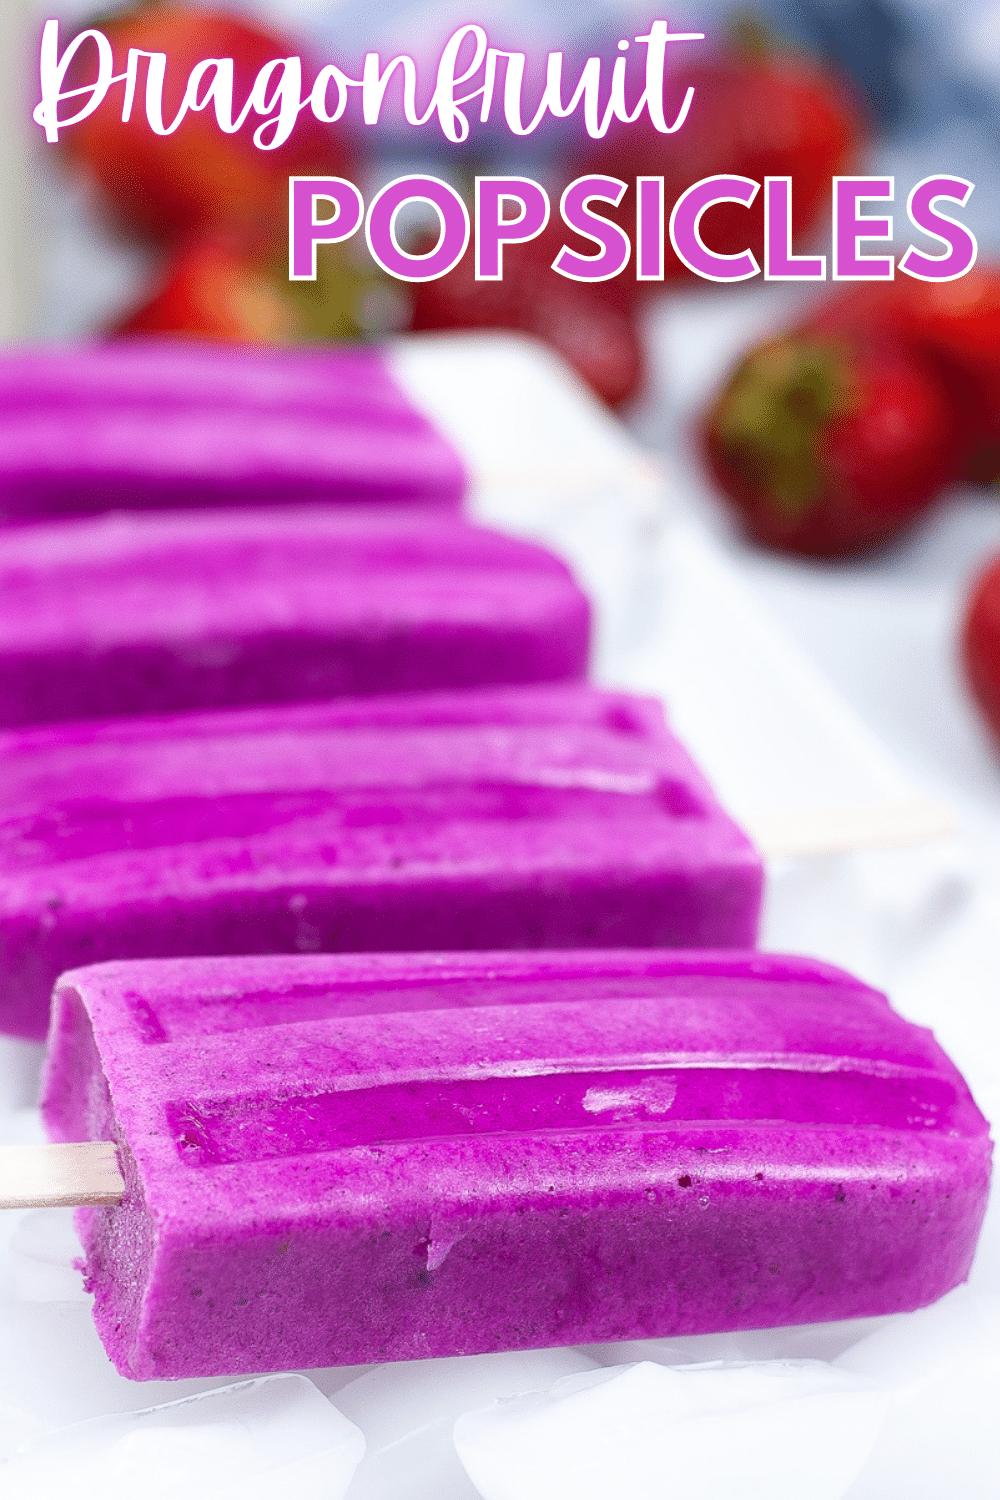 If you want a guilt-free treat that is perfect for summer, this dragon fruit popsicle is perfect! It's a sweet treat for all! #dragonfruit #popsicle #recipe #dessert via @wondermomwannab